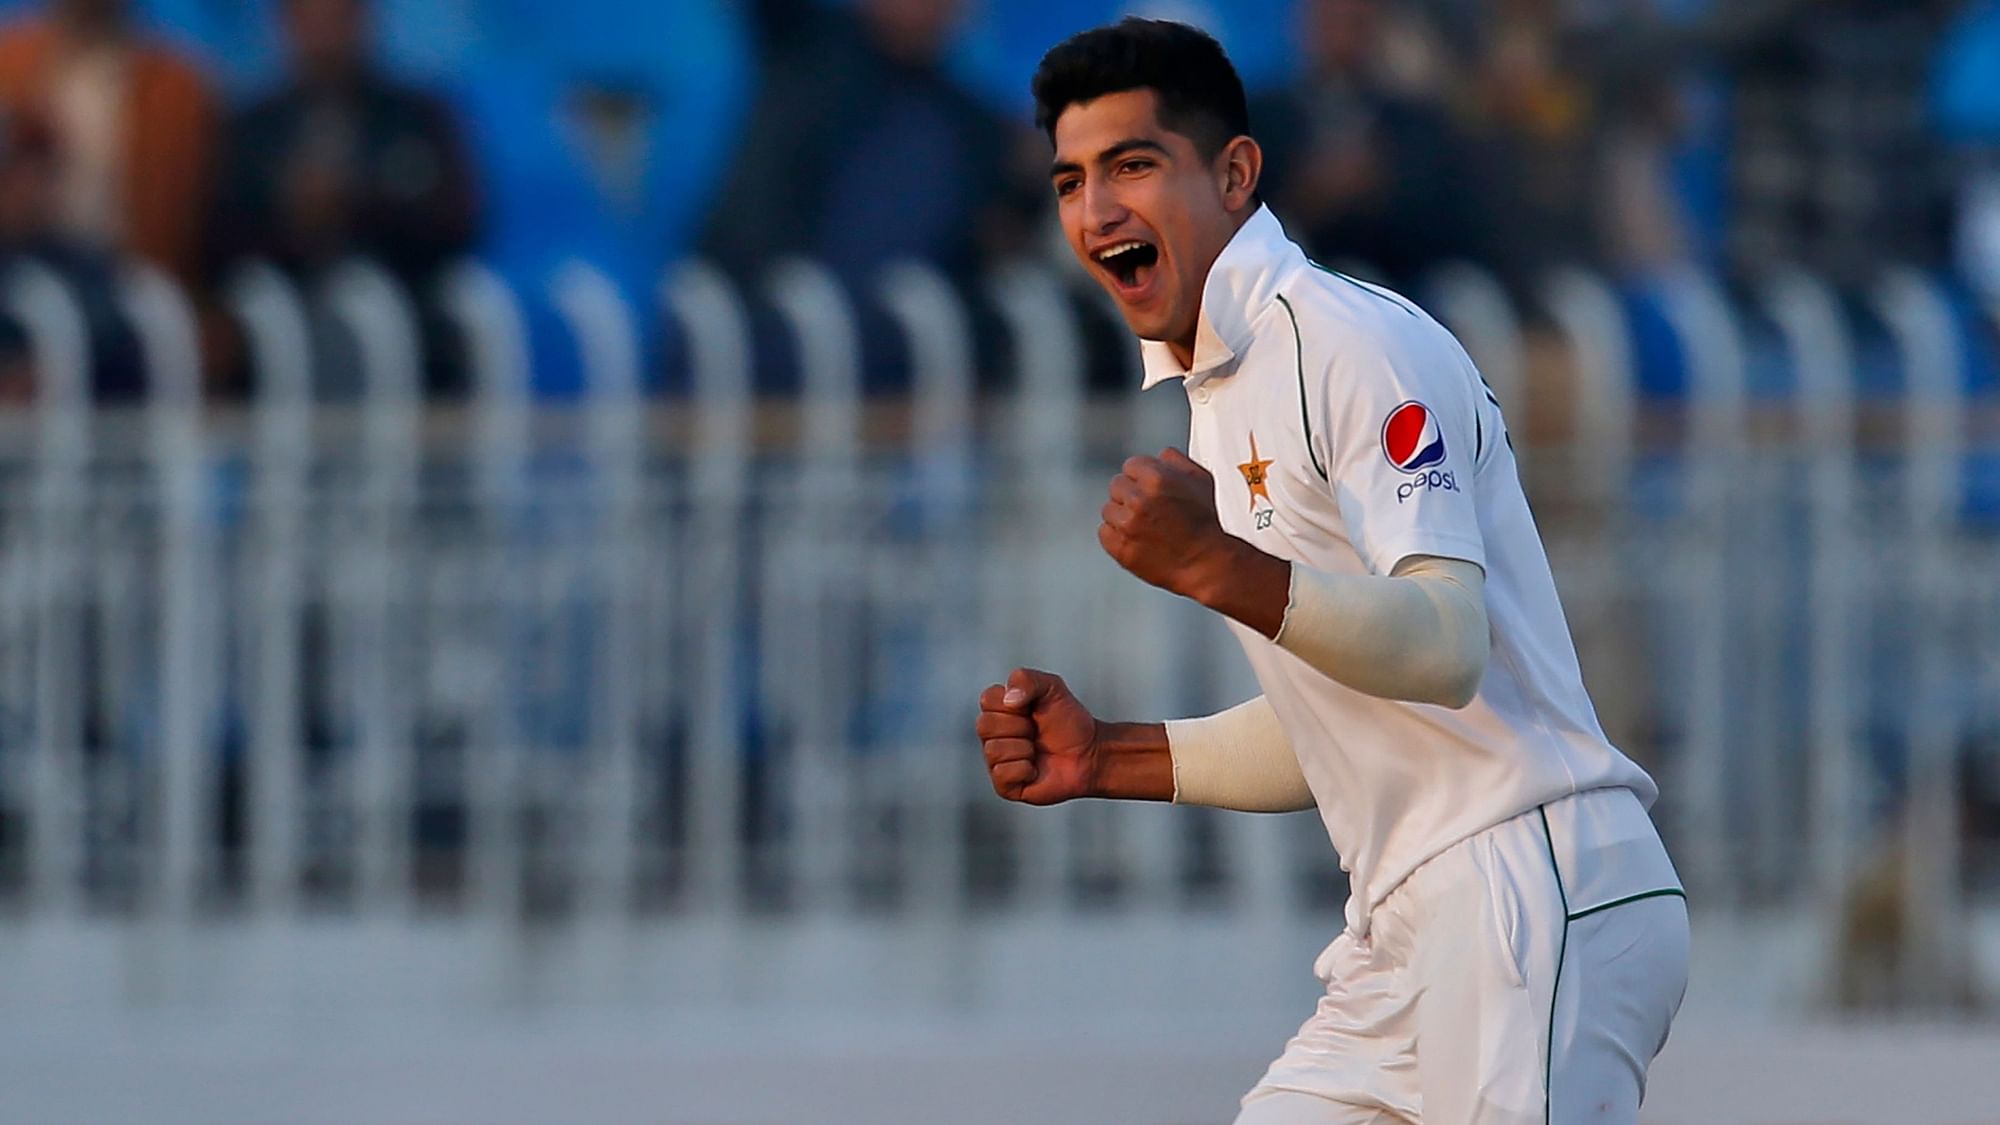  Naseem Shah on Sunday, 9 February became the youngest player to claim a hat-trick in Test cricket history.